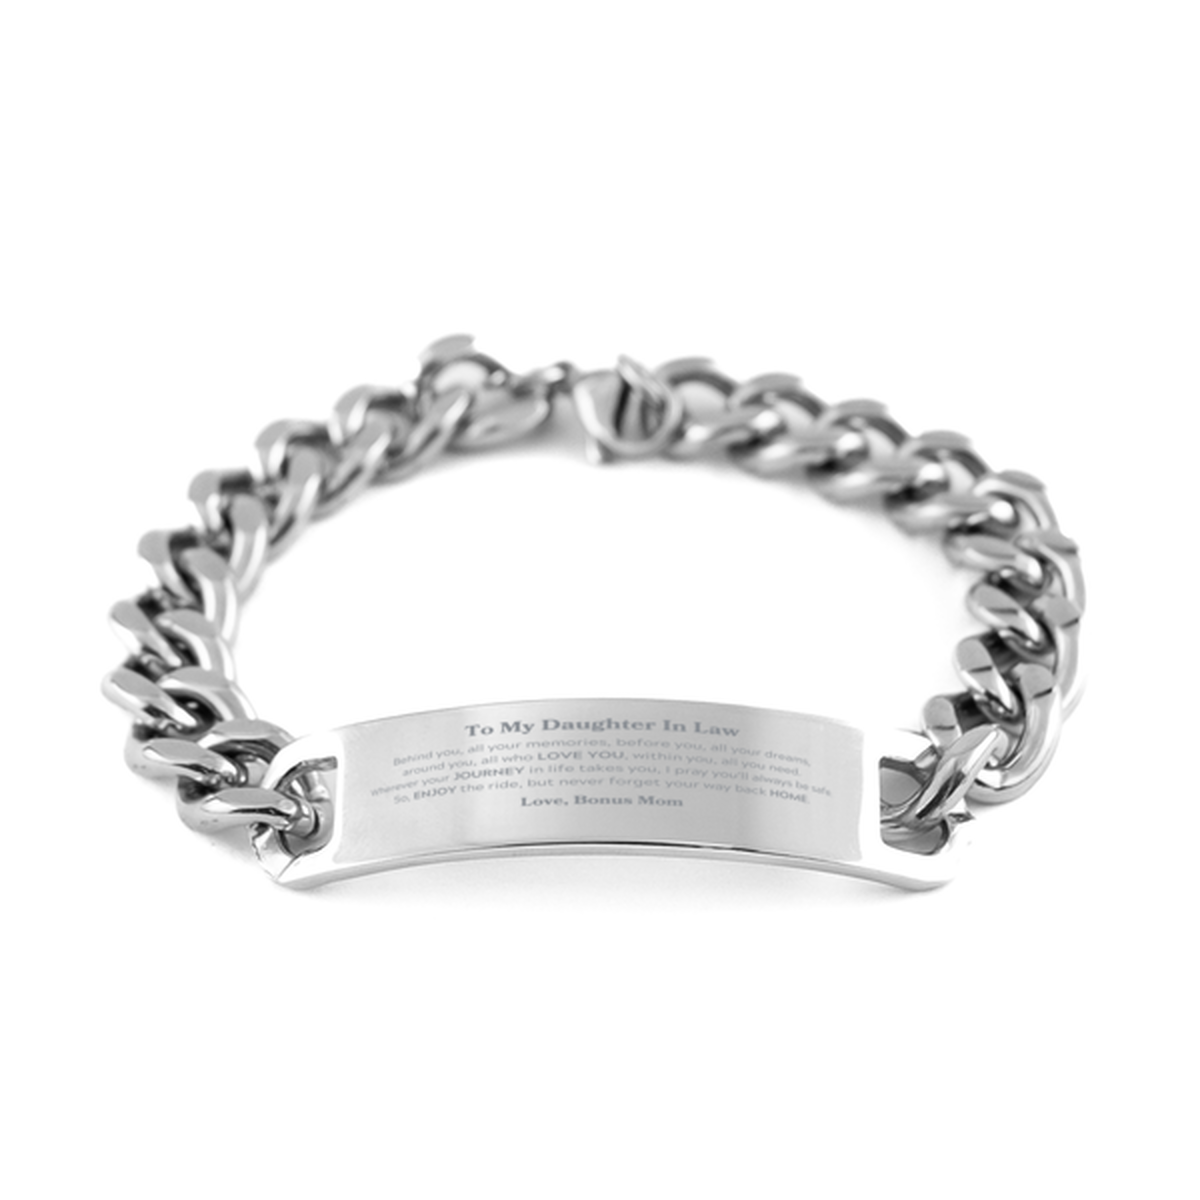 To My Daughter In Law Graduation Gifts from Bonus Mom, Daughter In Law Cuban Chain Stainless Steel Bracelet Christmas Birthday Gifts for Daughter In Law Behind you, all your memories, before you, all your dreams. Love, Bonus Mom